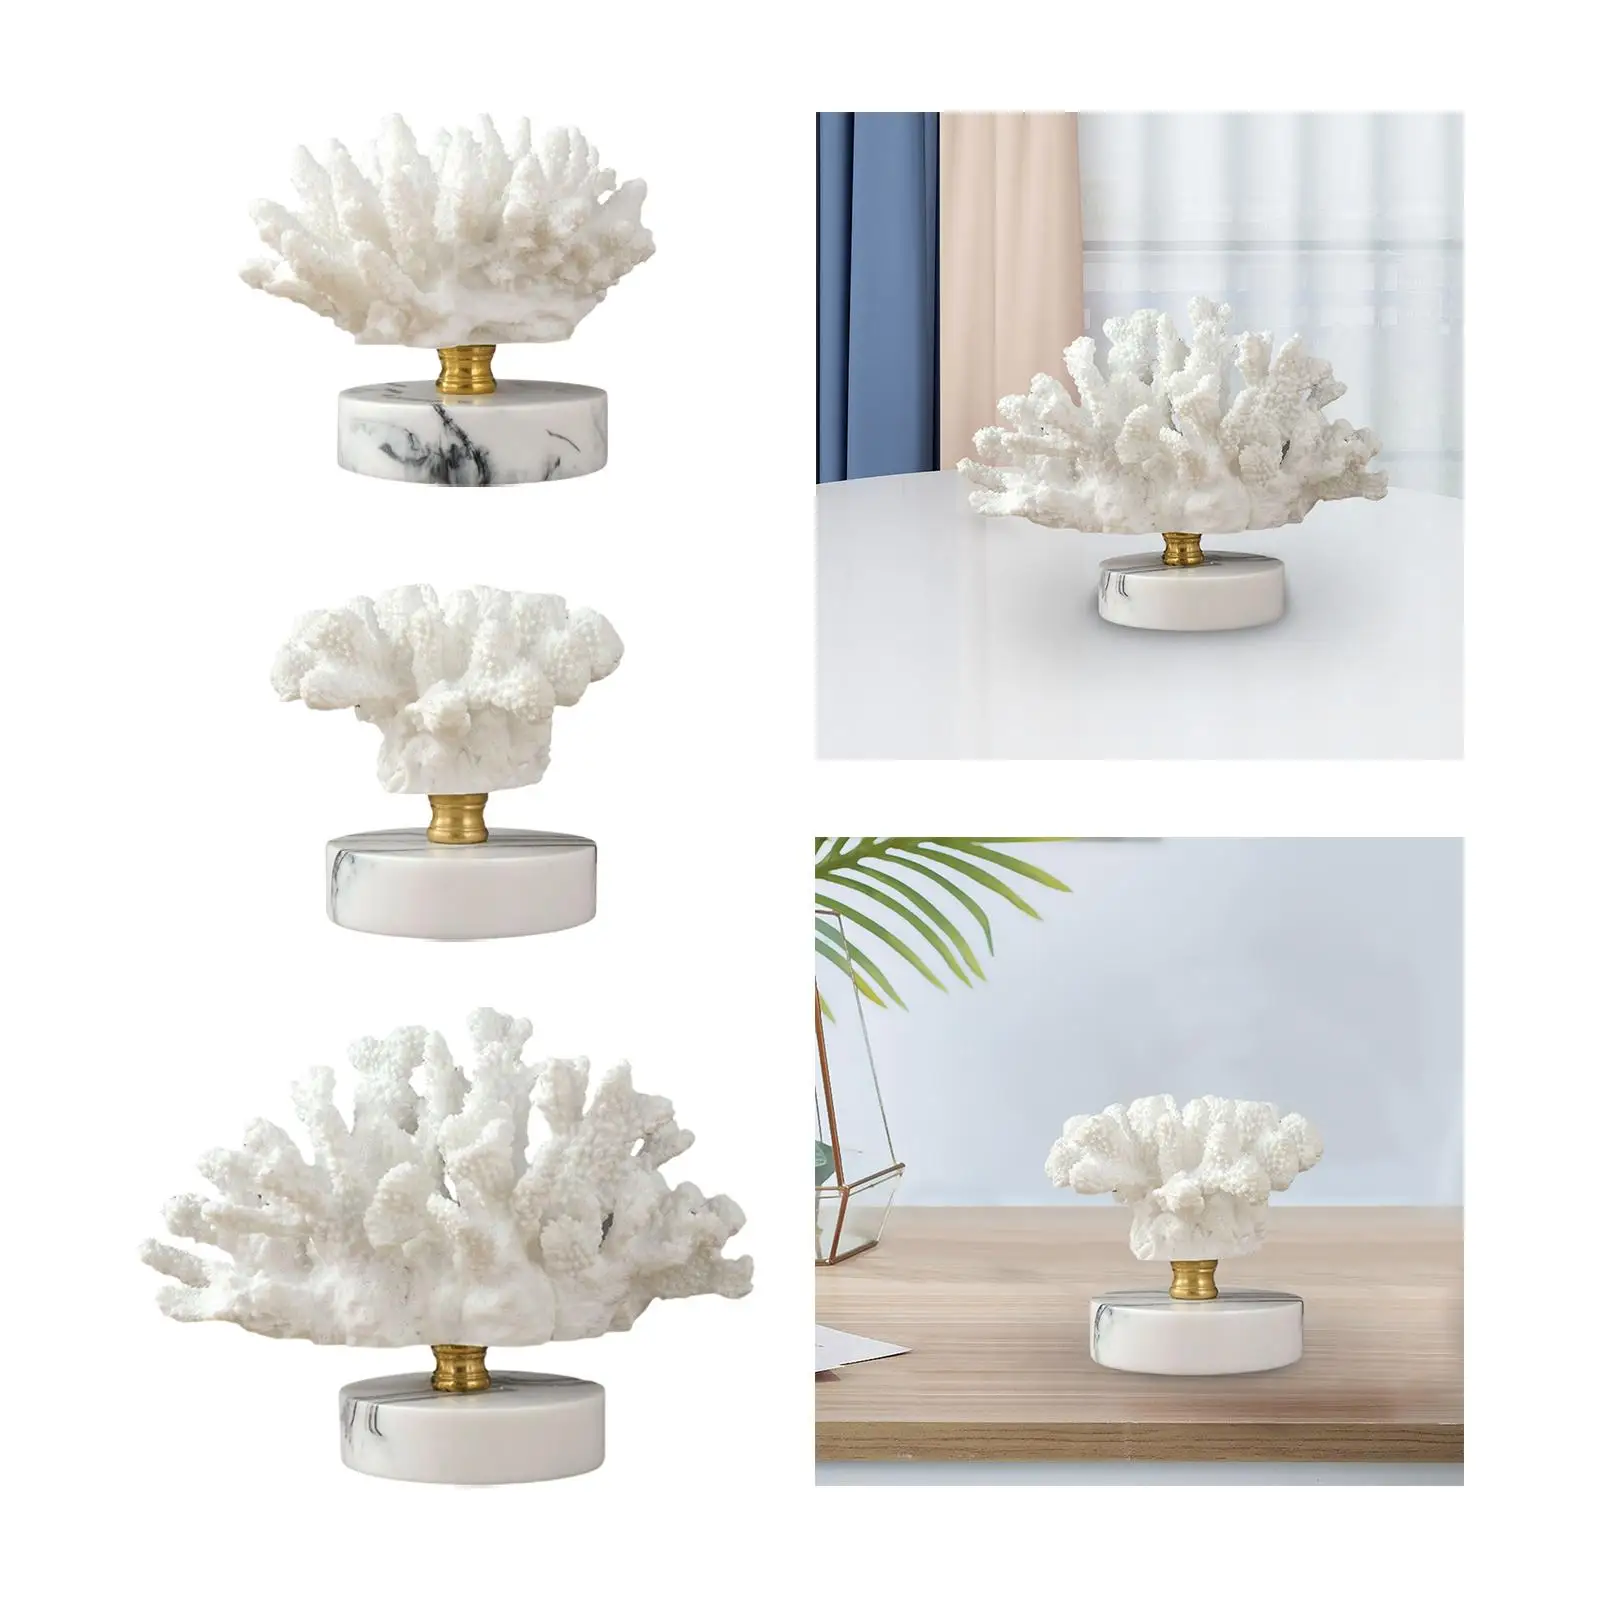 Artificial Coral Sculpture Crafts Marble Base Figurine Statue Arts Collection for Bookcase Bedroom Wedding Decoration Gift